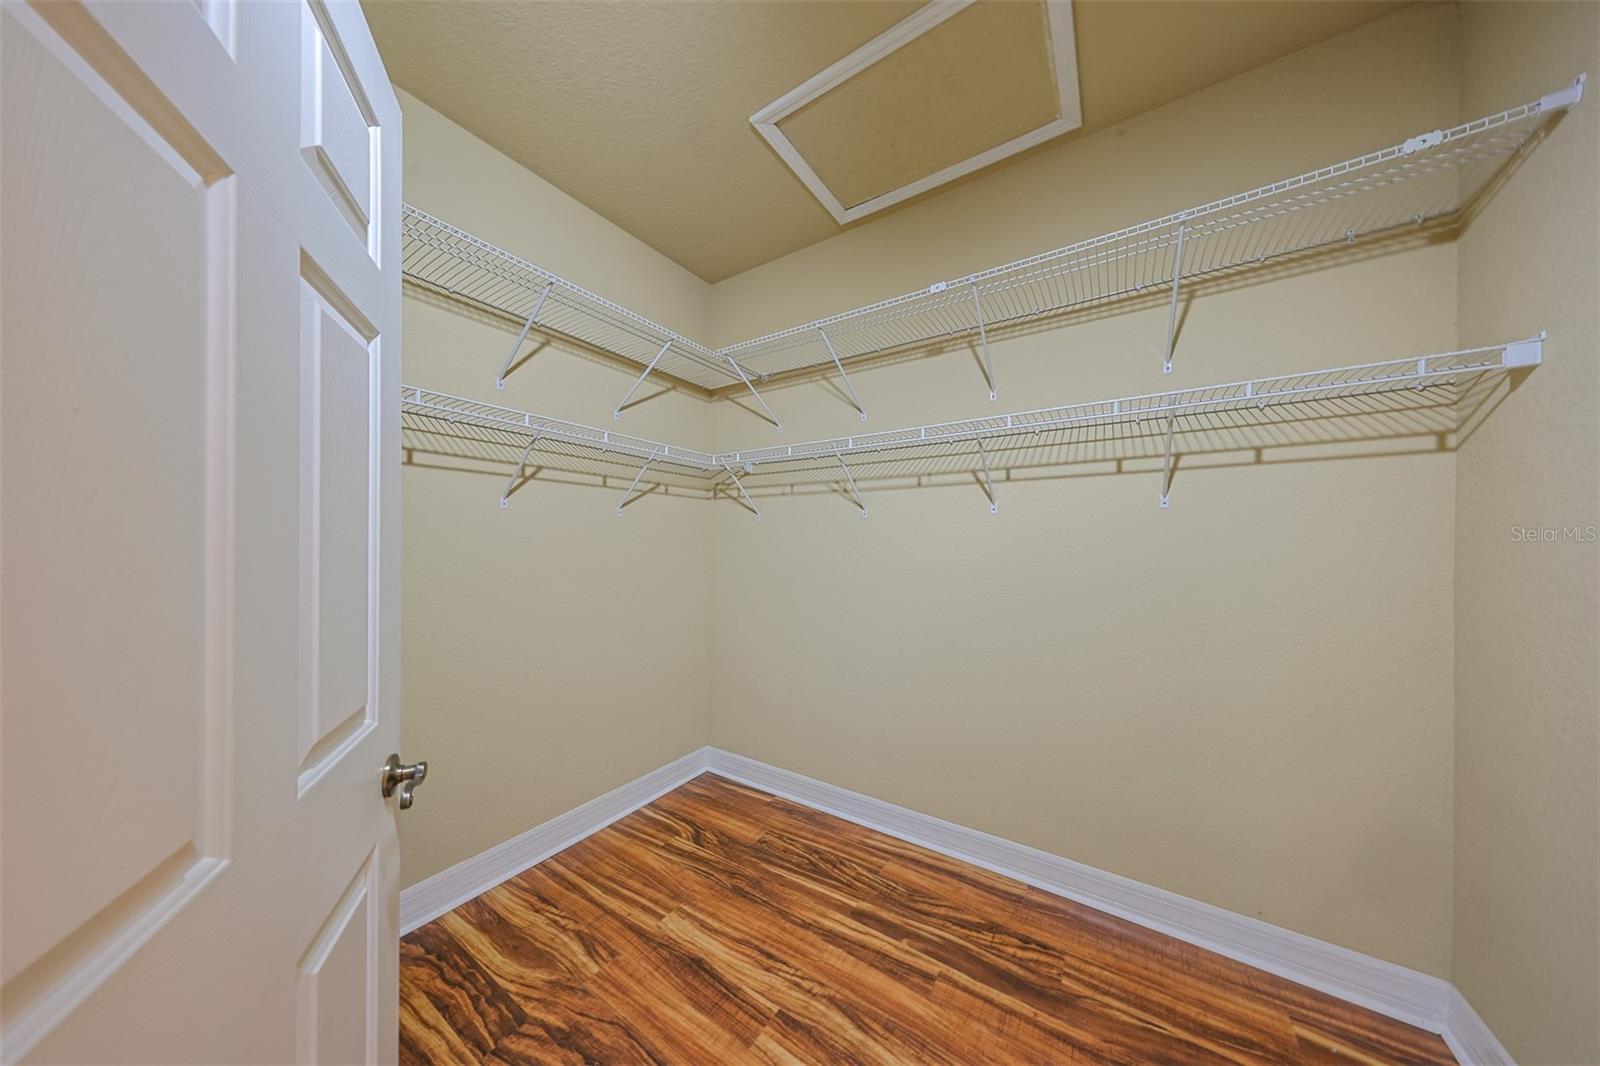 A large walk-in closet is included in the master ensuite, along with a linen closet and another wall closet.